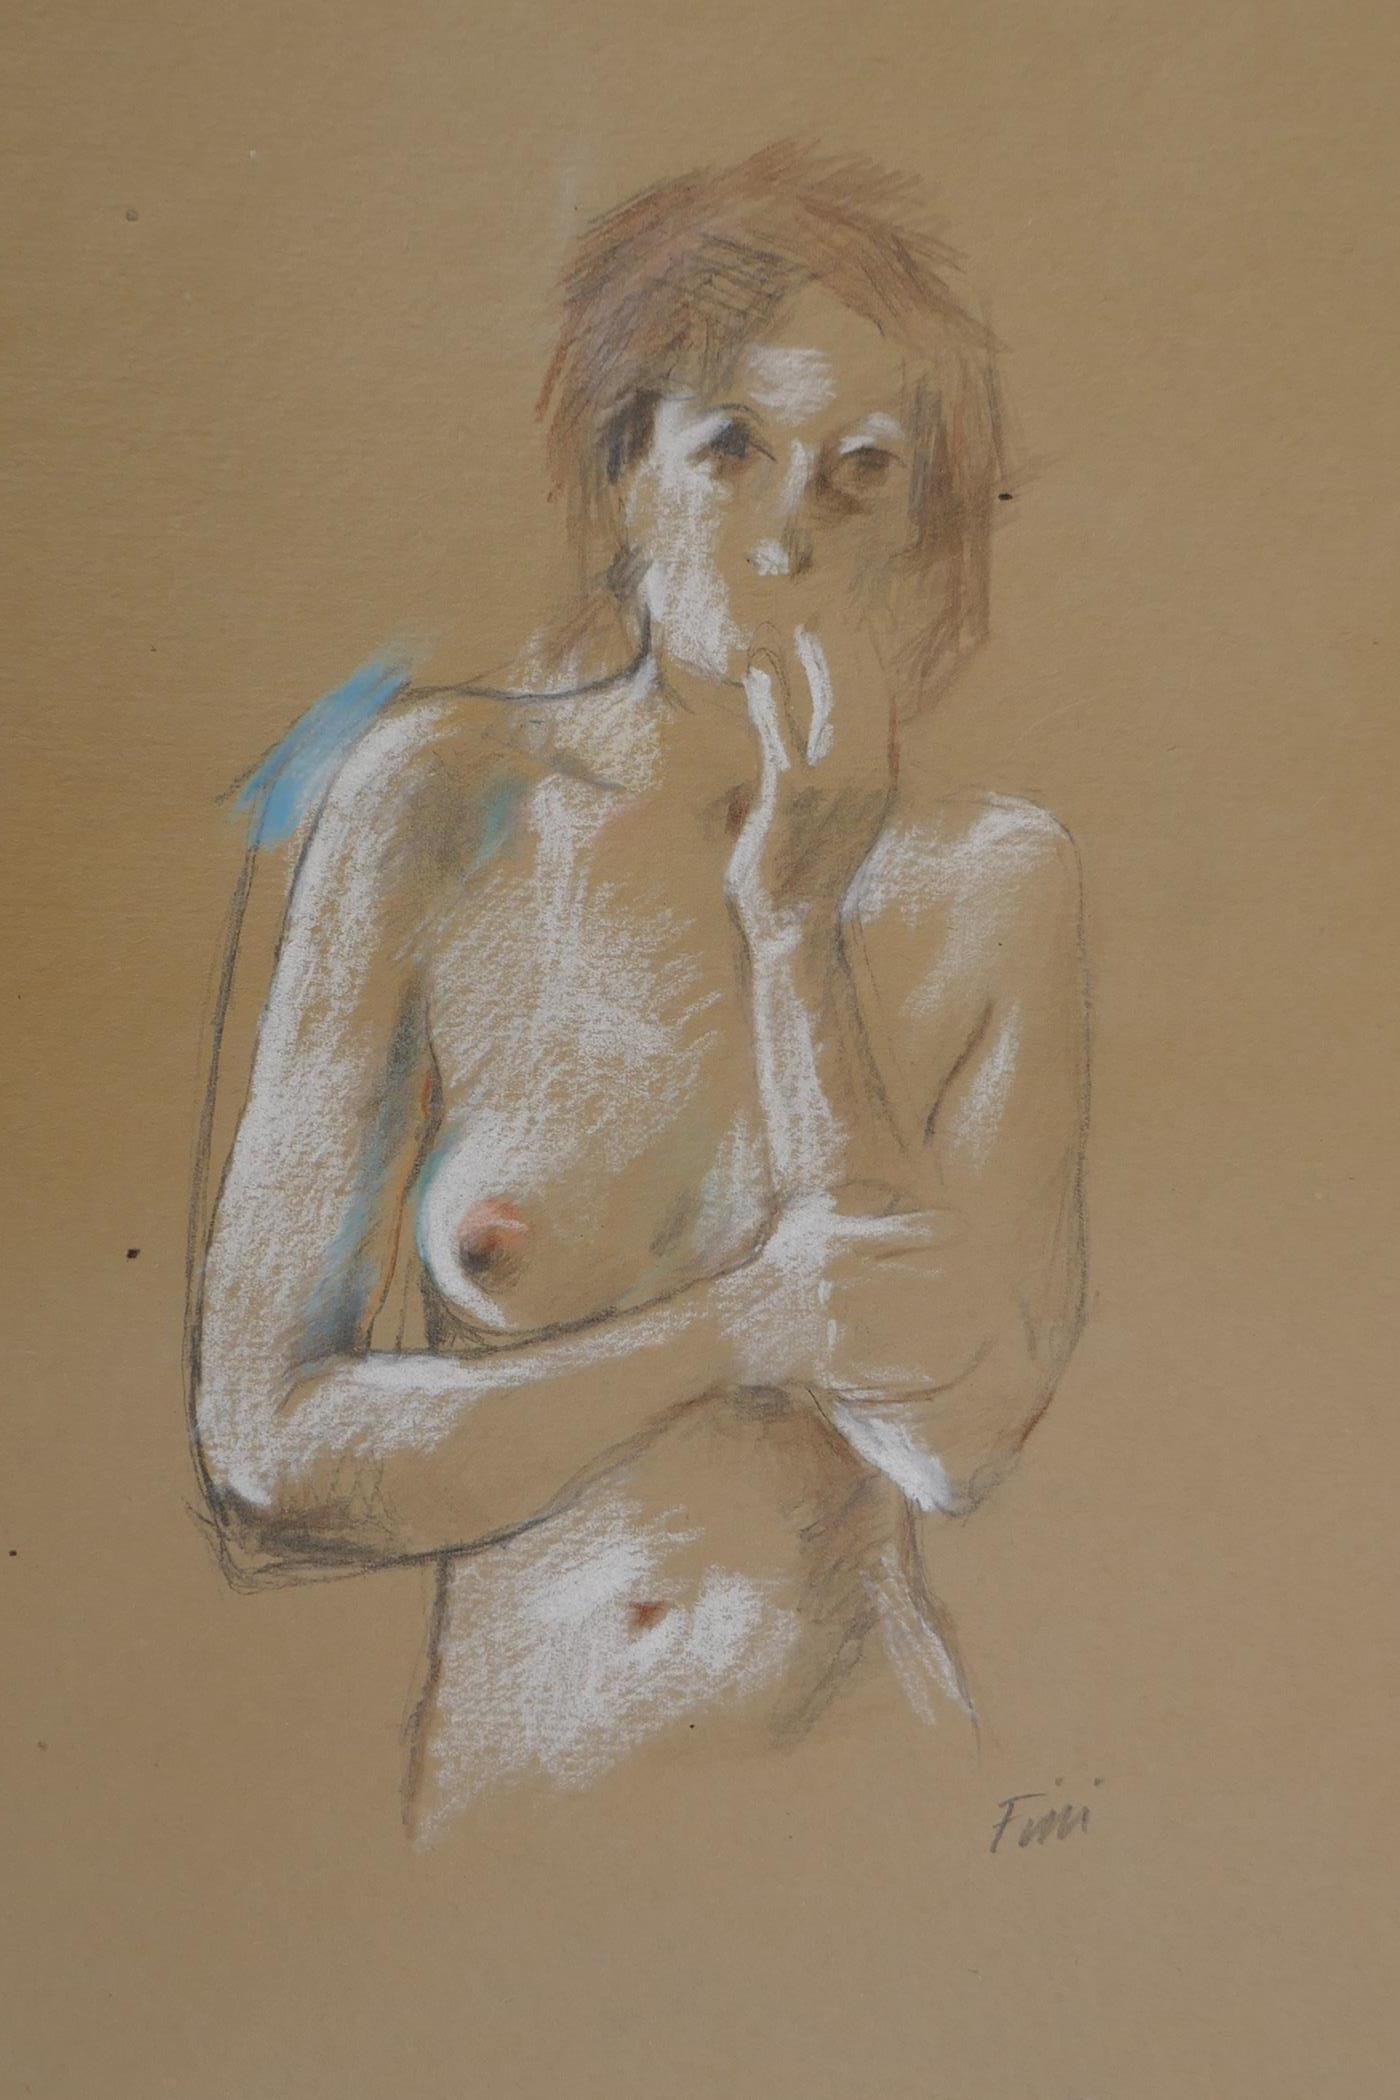 A study of a female figure, signed 'Fini', unframed pastel and pencil drawing, 22" x 14½"